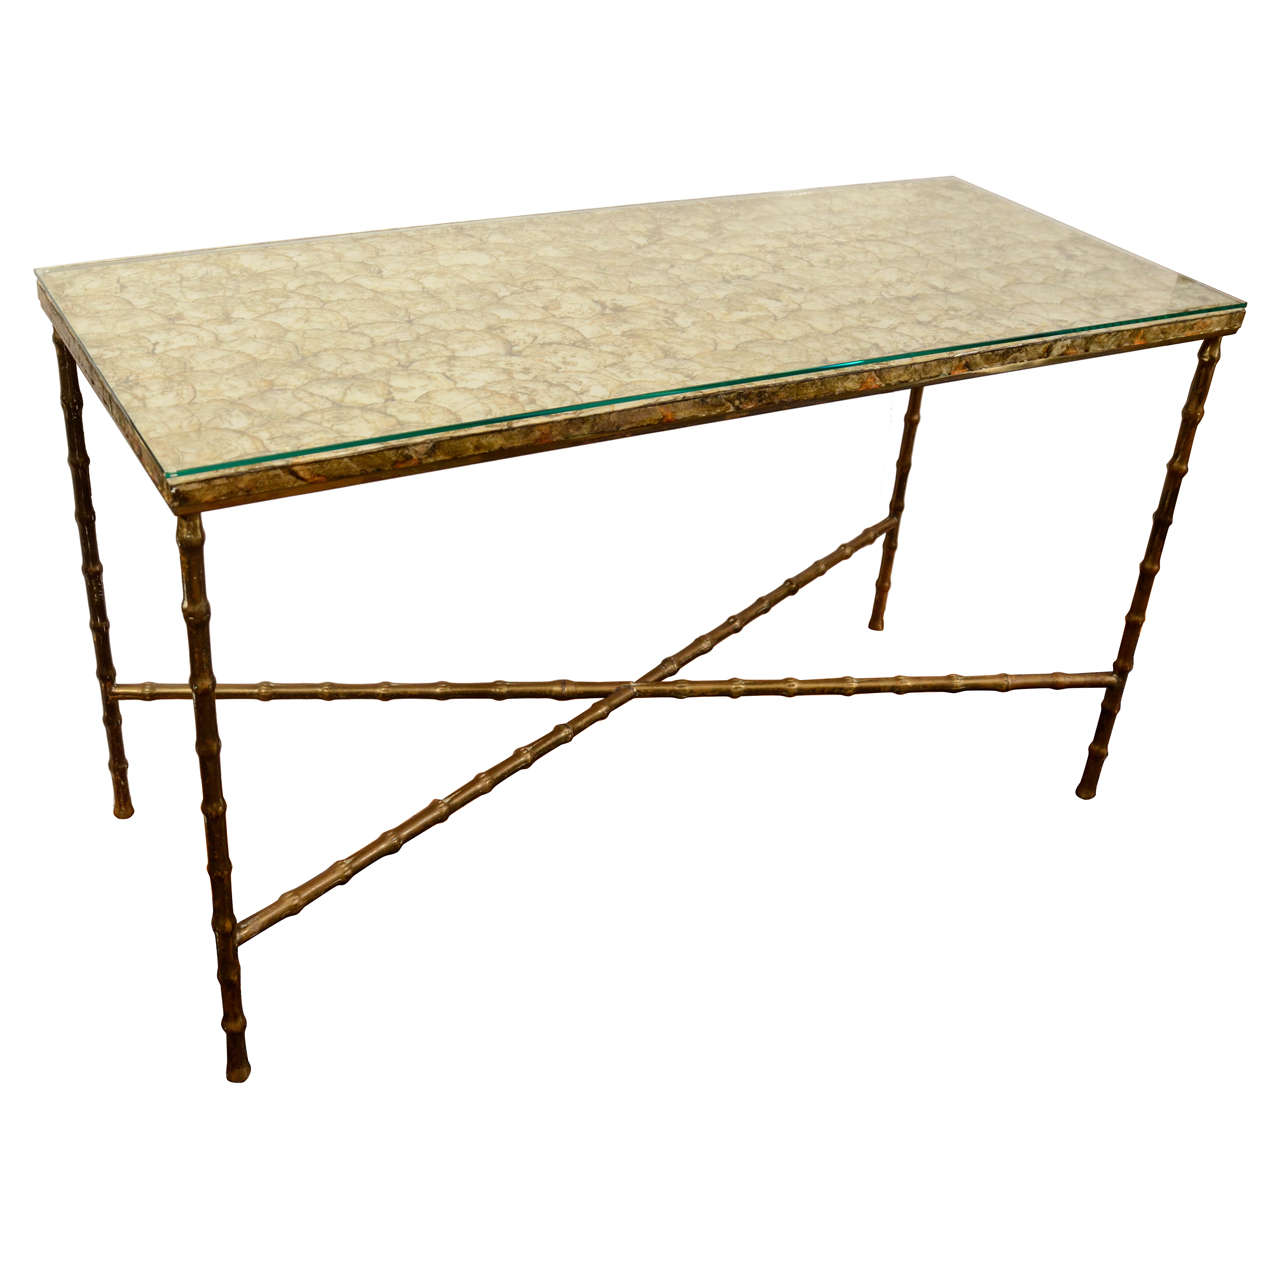 Maison Baguès Style Console Table with Capiz Shell Top on Brass Faux Bamboo Base